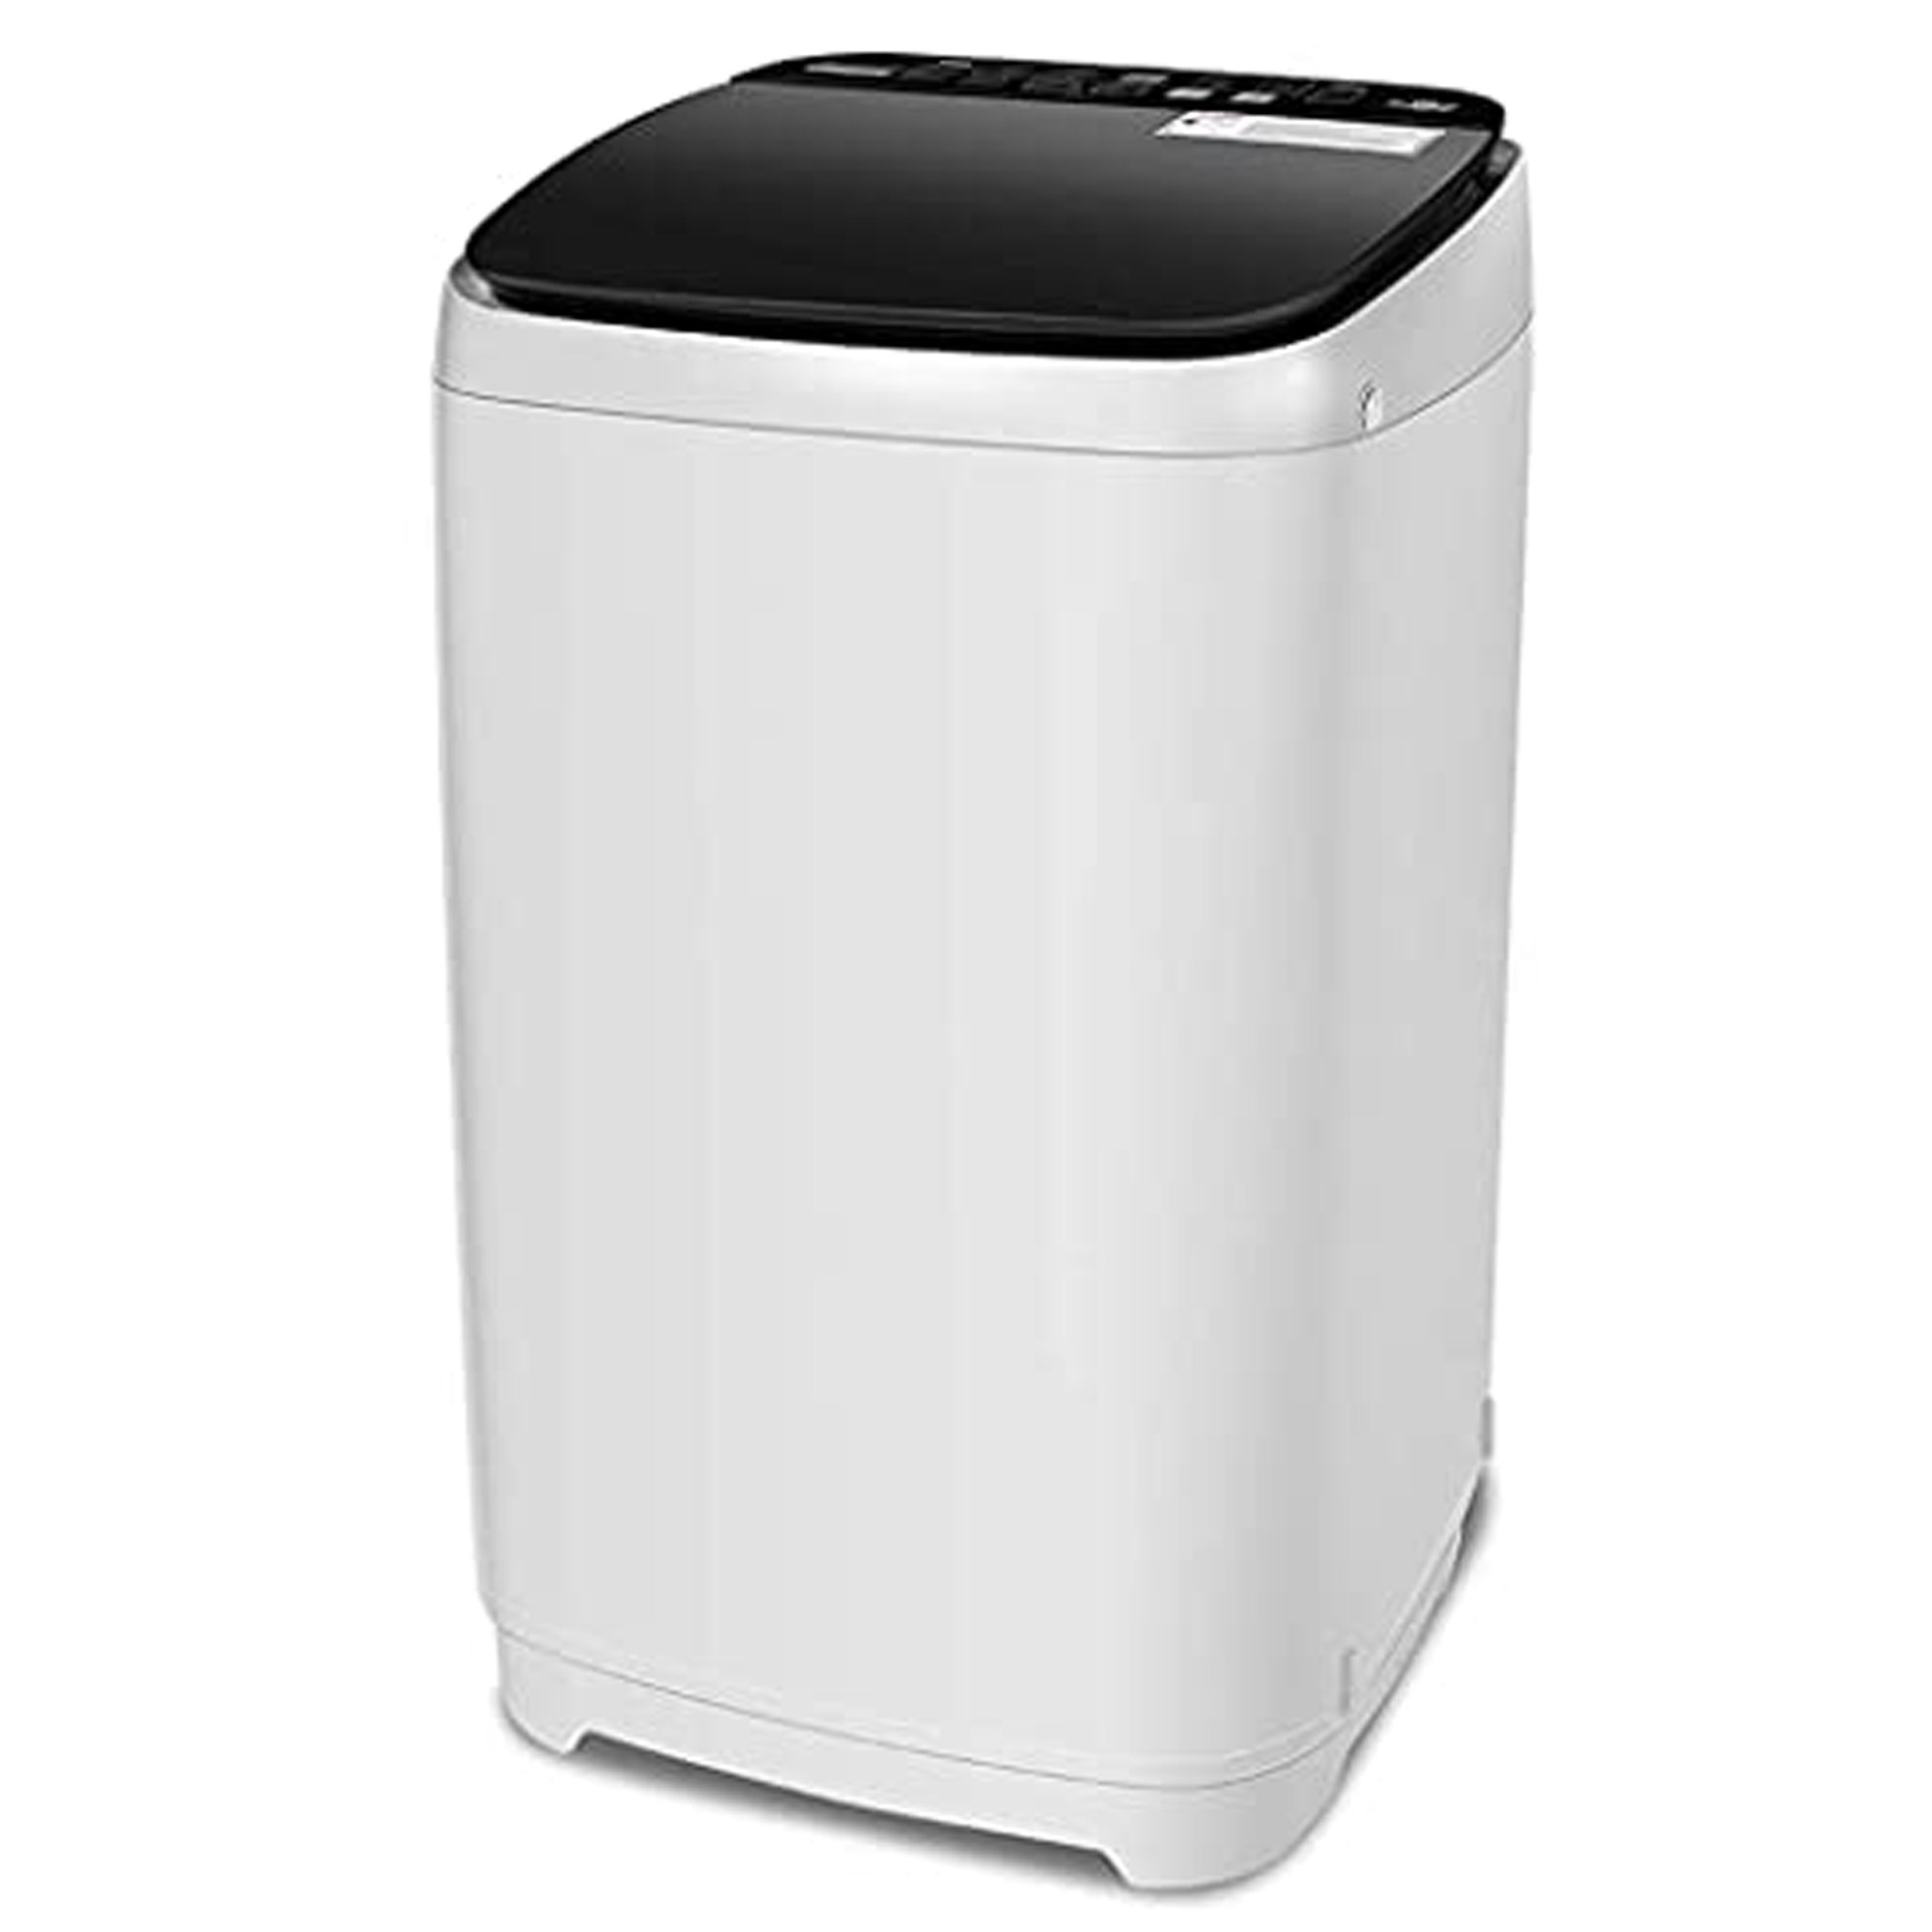 1.5 cu. ft. High Efficiency Full-Automatic Portable Top Load Washer Dryer  with Child Lock in White-UL and ETL Certified